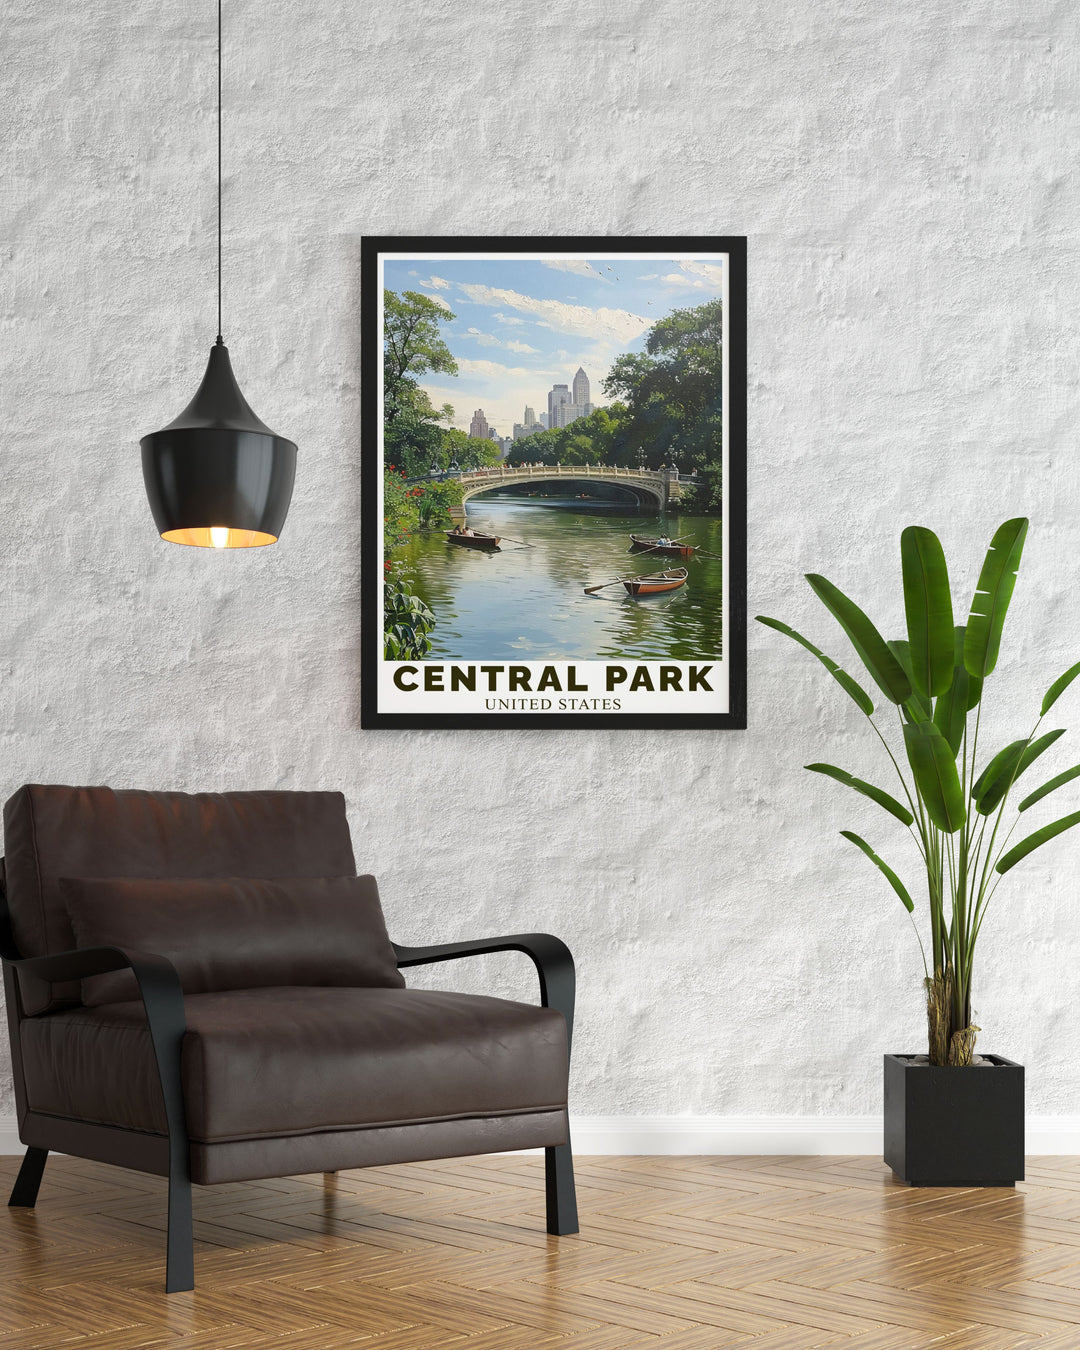 Featuring the elegant design of Bow Bridge and the vibrant greenery of Central Park, this poster is ideal for those who wish to bring a piece of New Yorks serene beauty into their home.